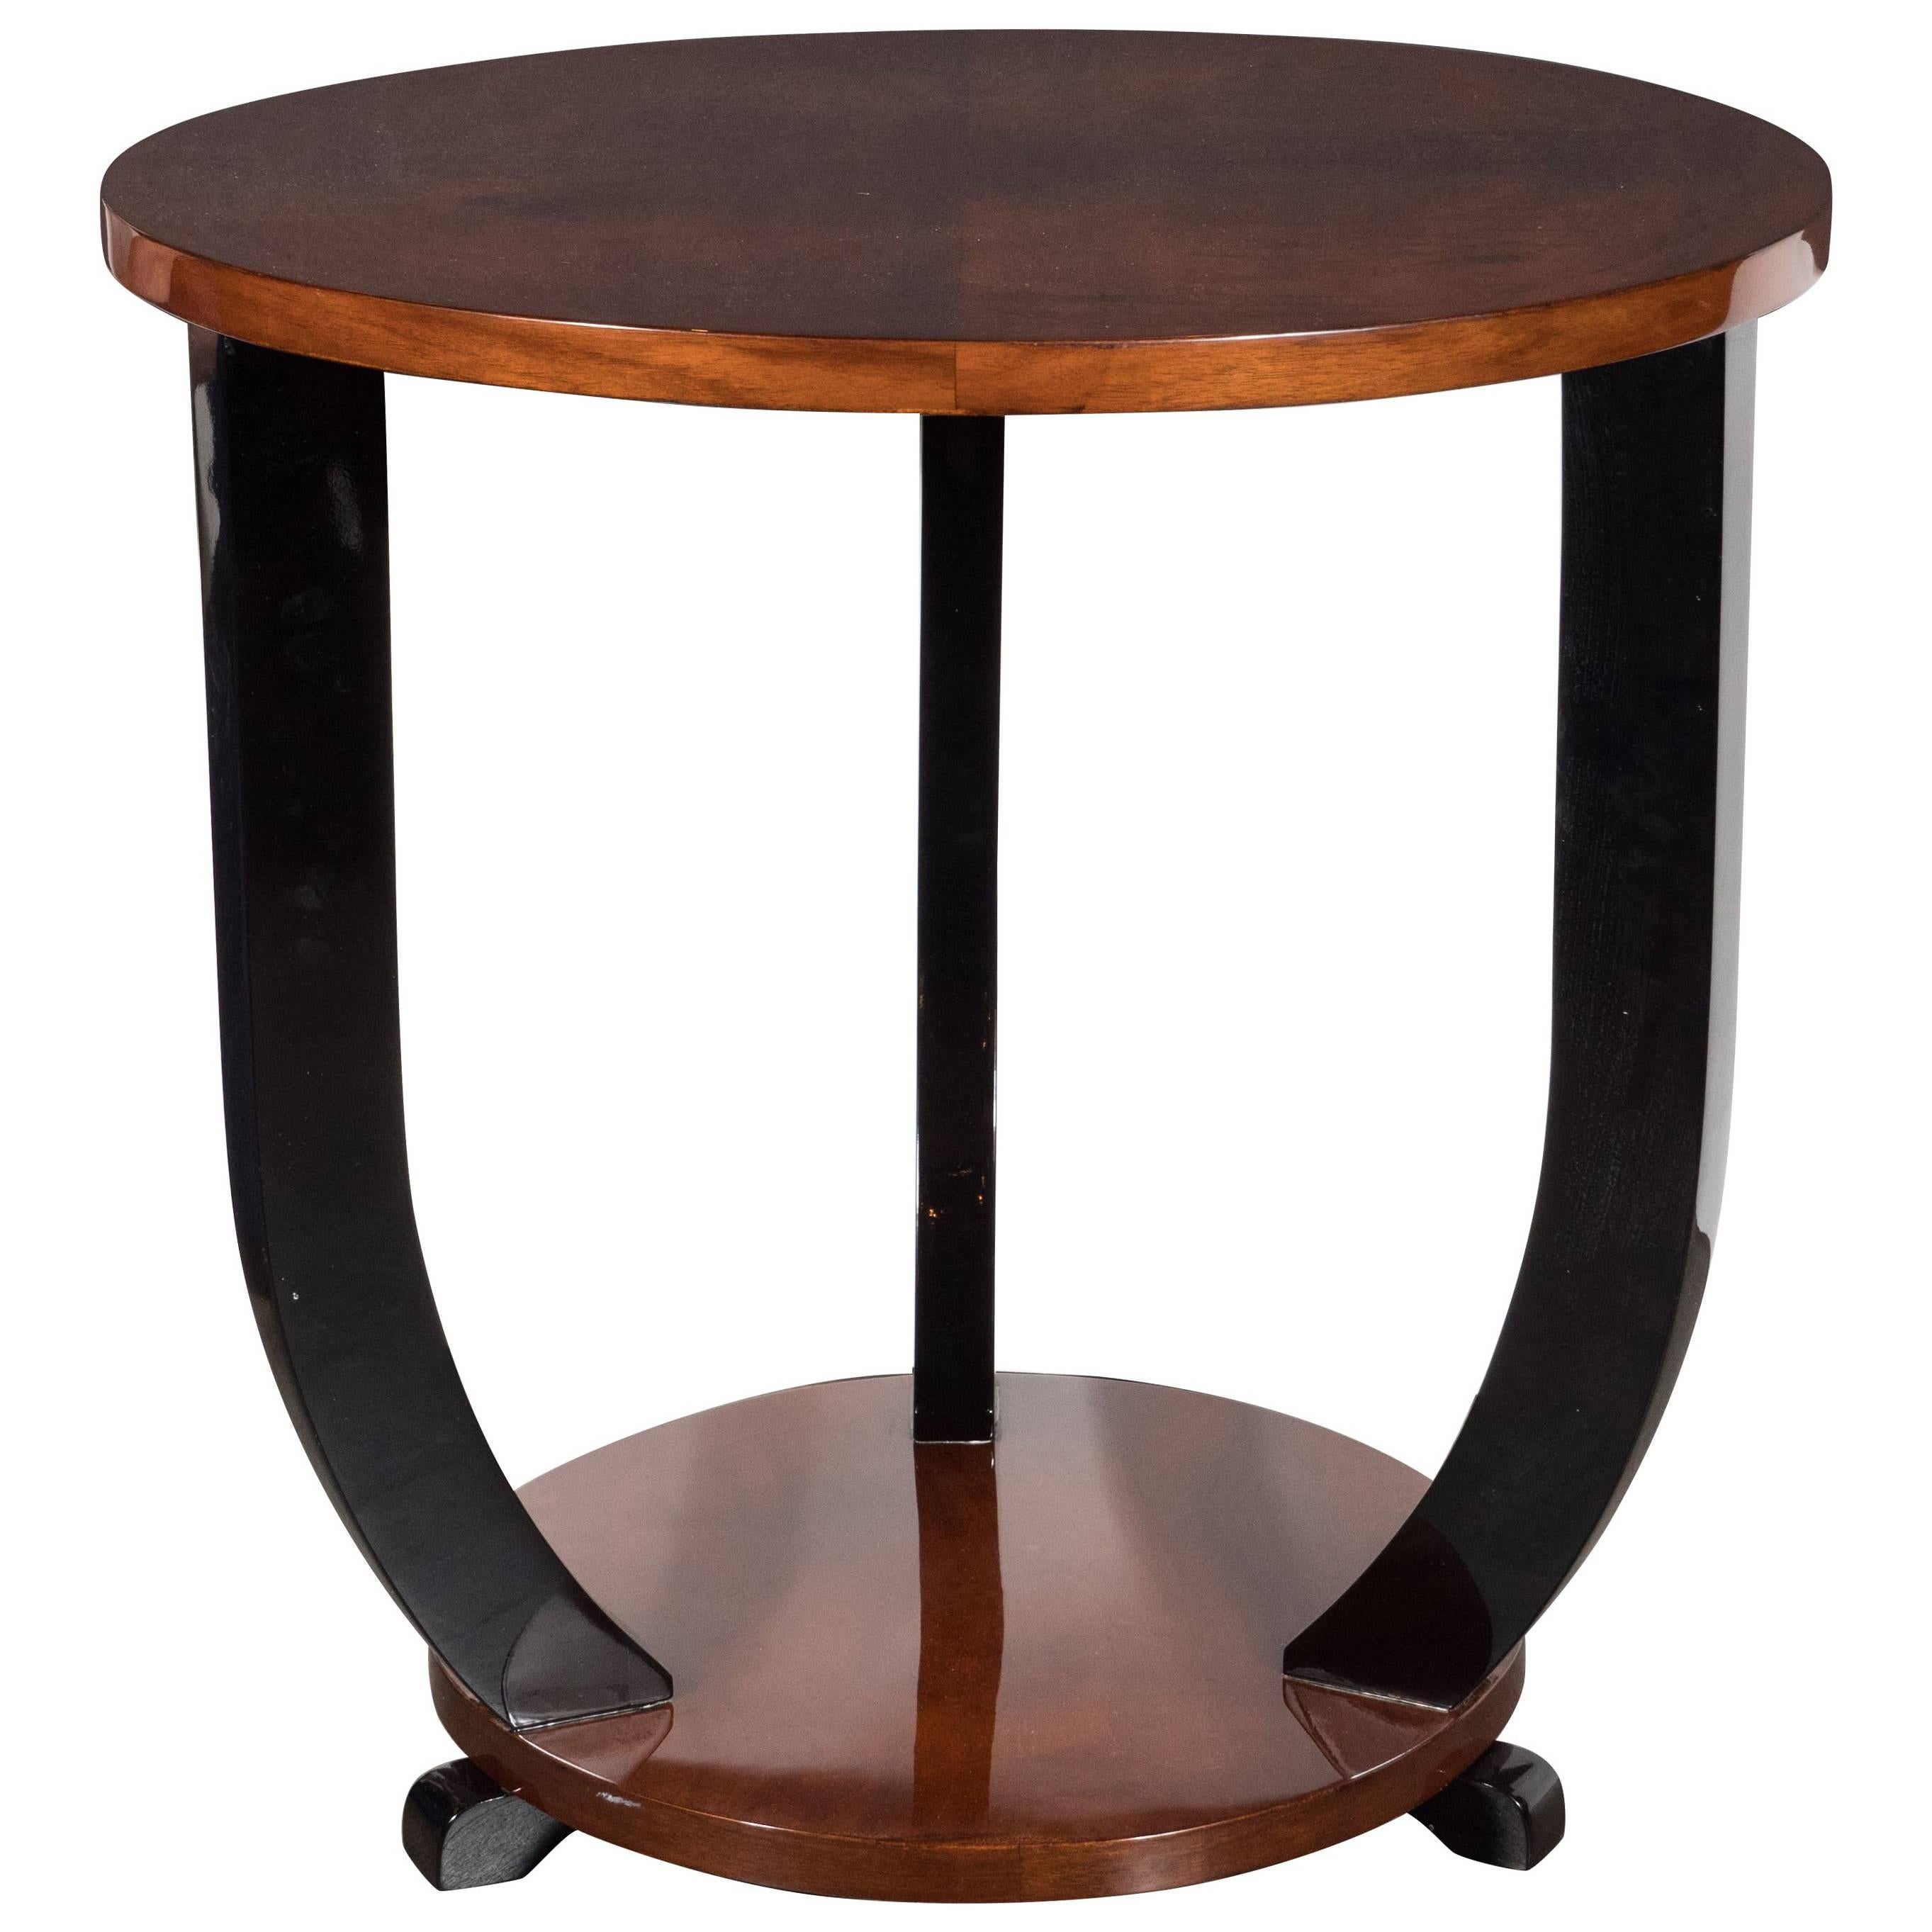 French Art Deco Two-Tiered Bookmatched Walnut & Black Lacquer Gueridon Table